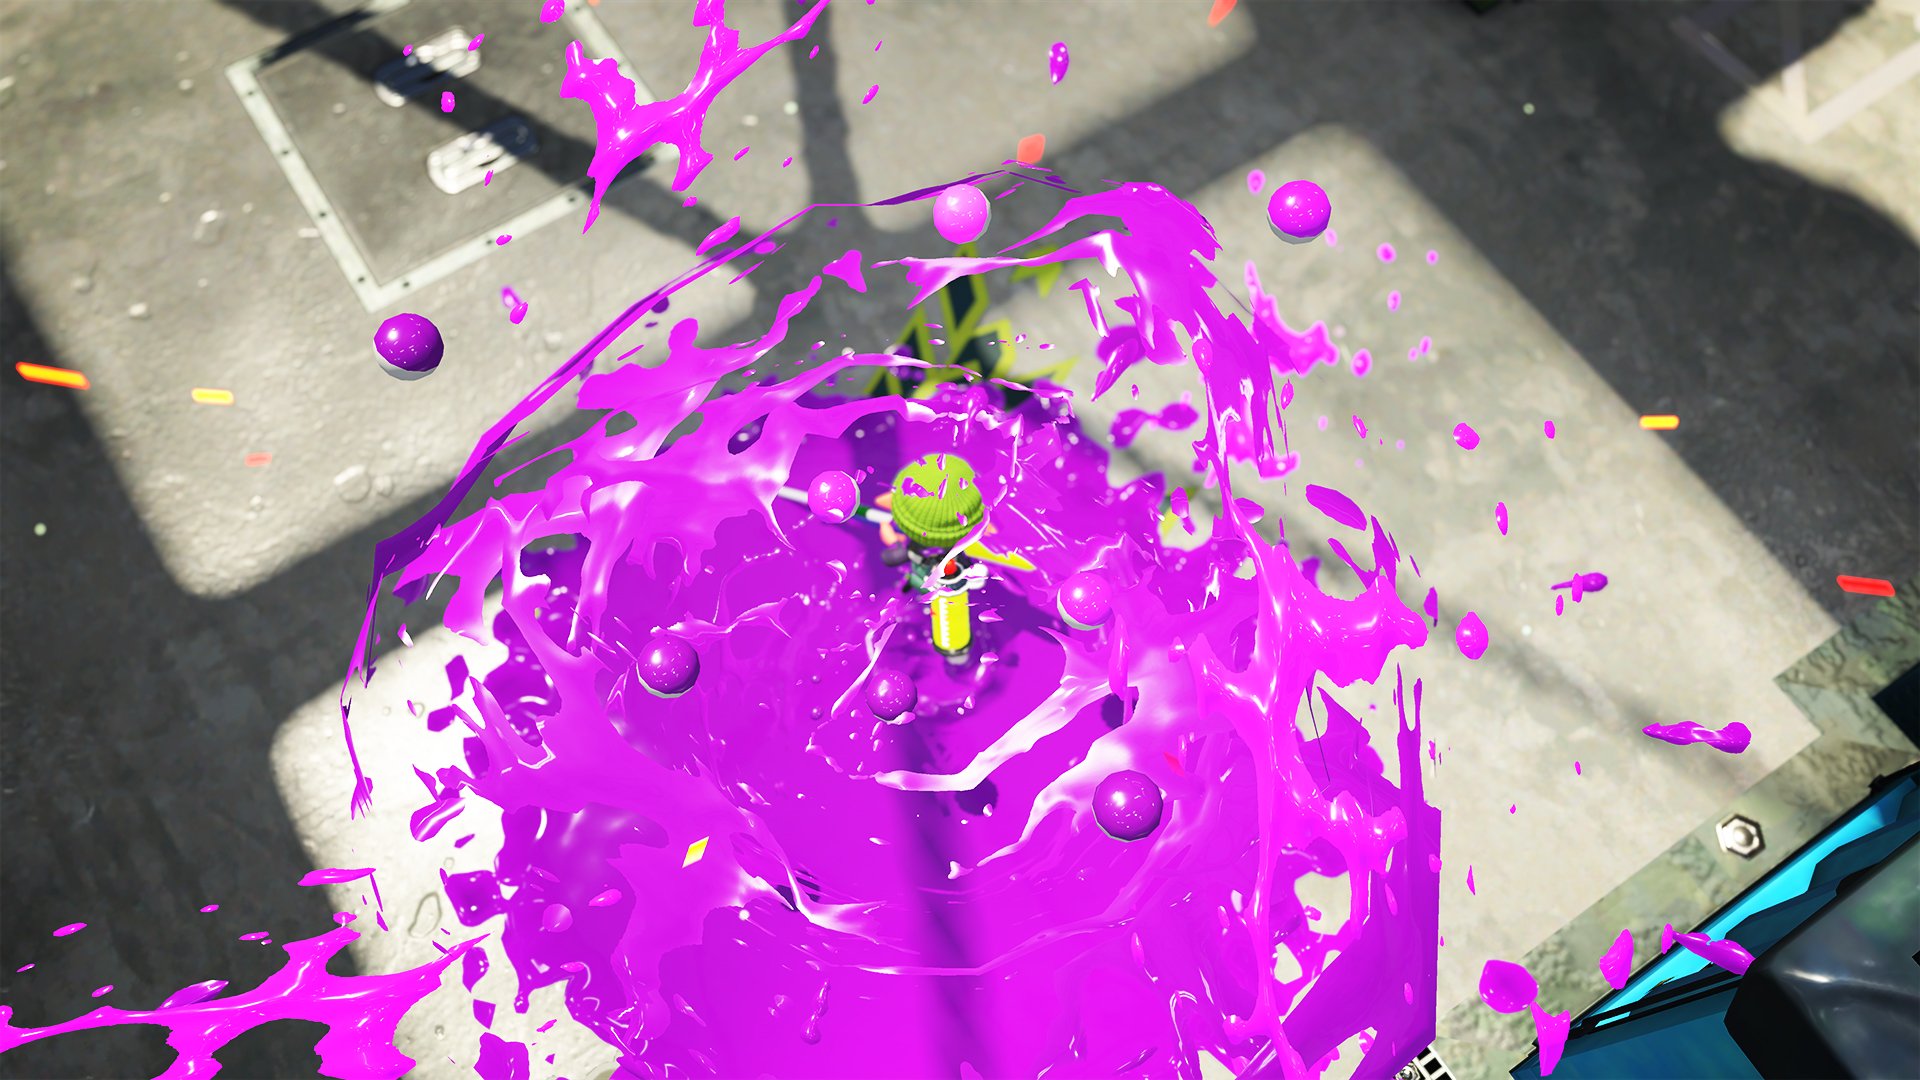 The Ultra Stamp and the Torpedo will be added to Splatoon 2 on November 6th...